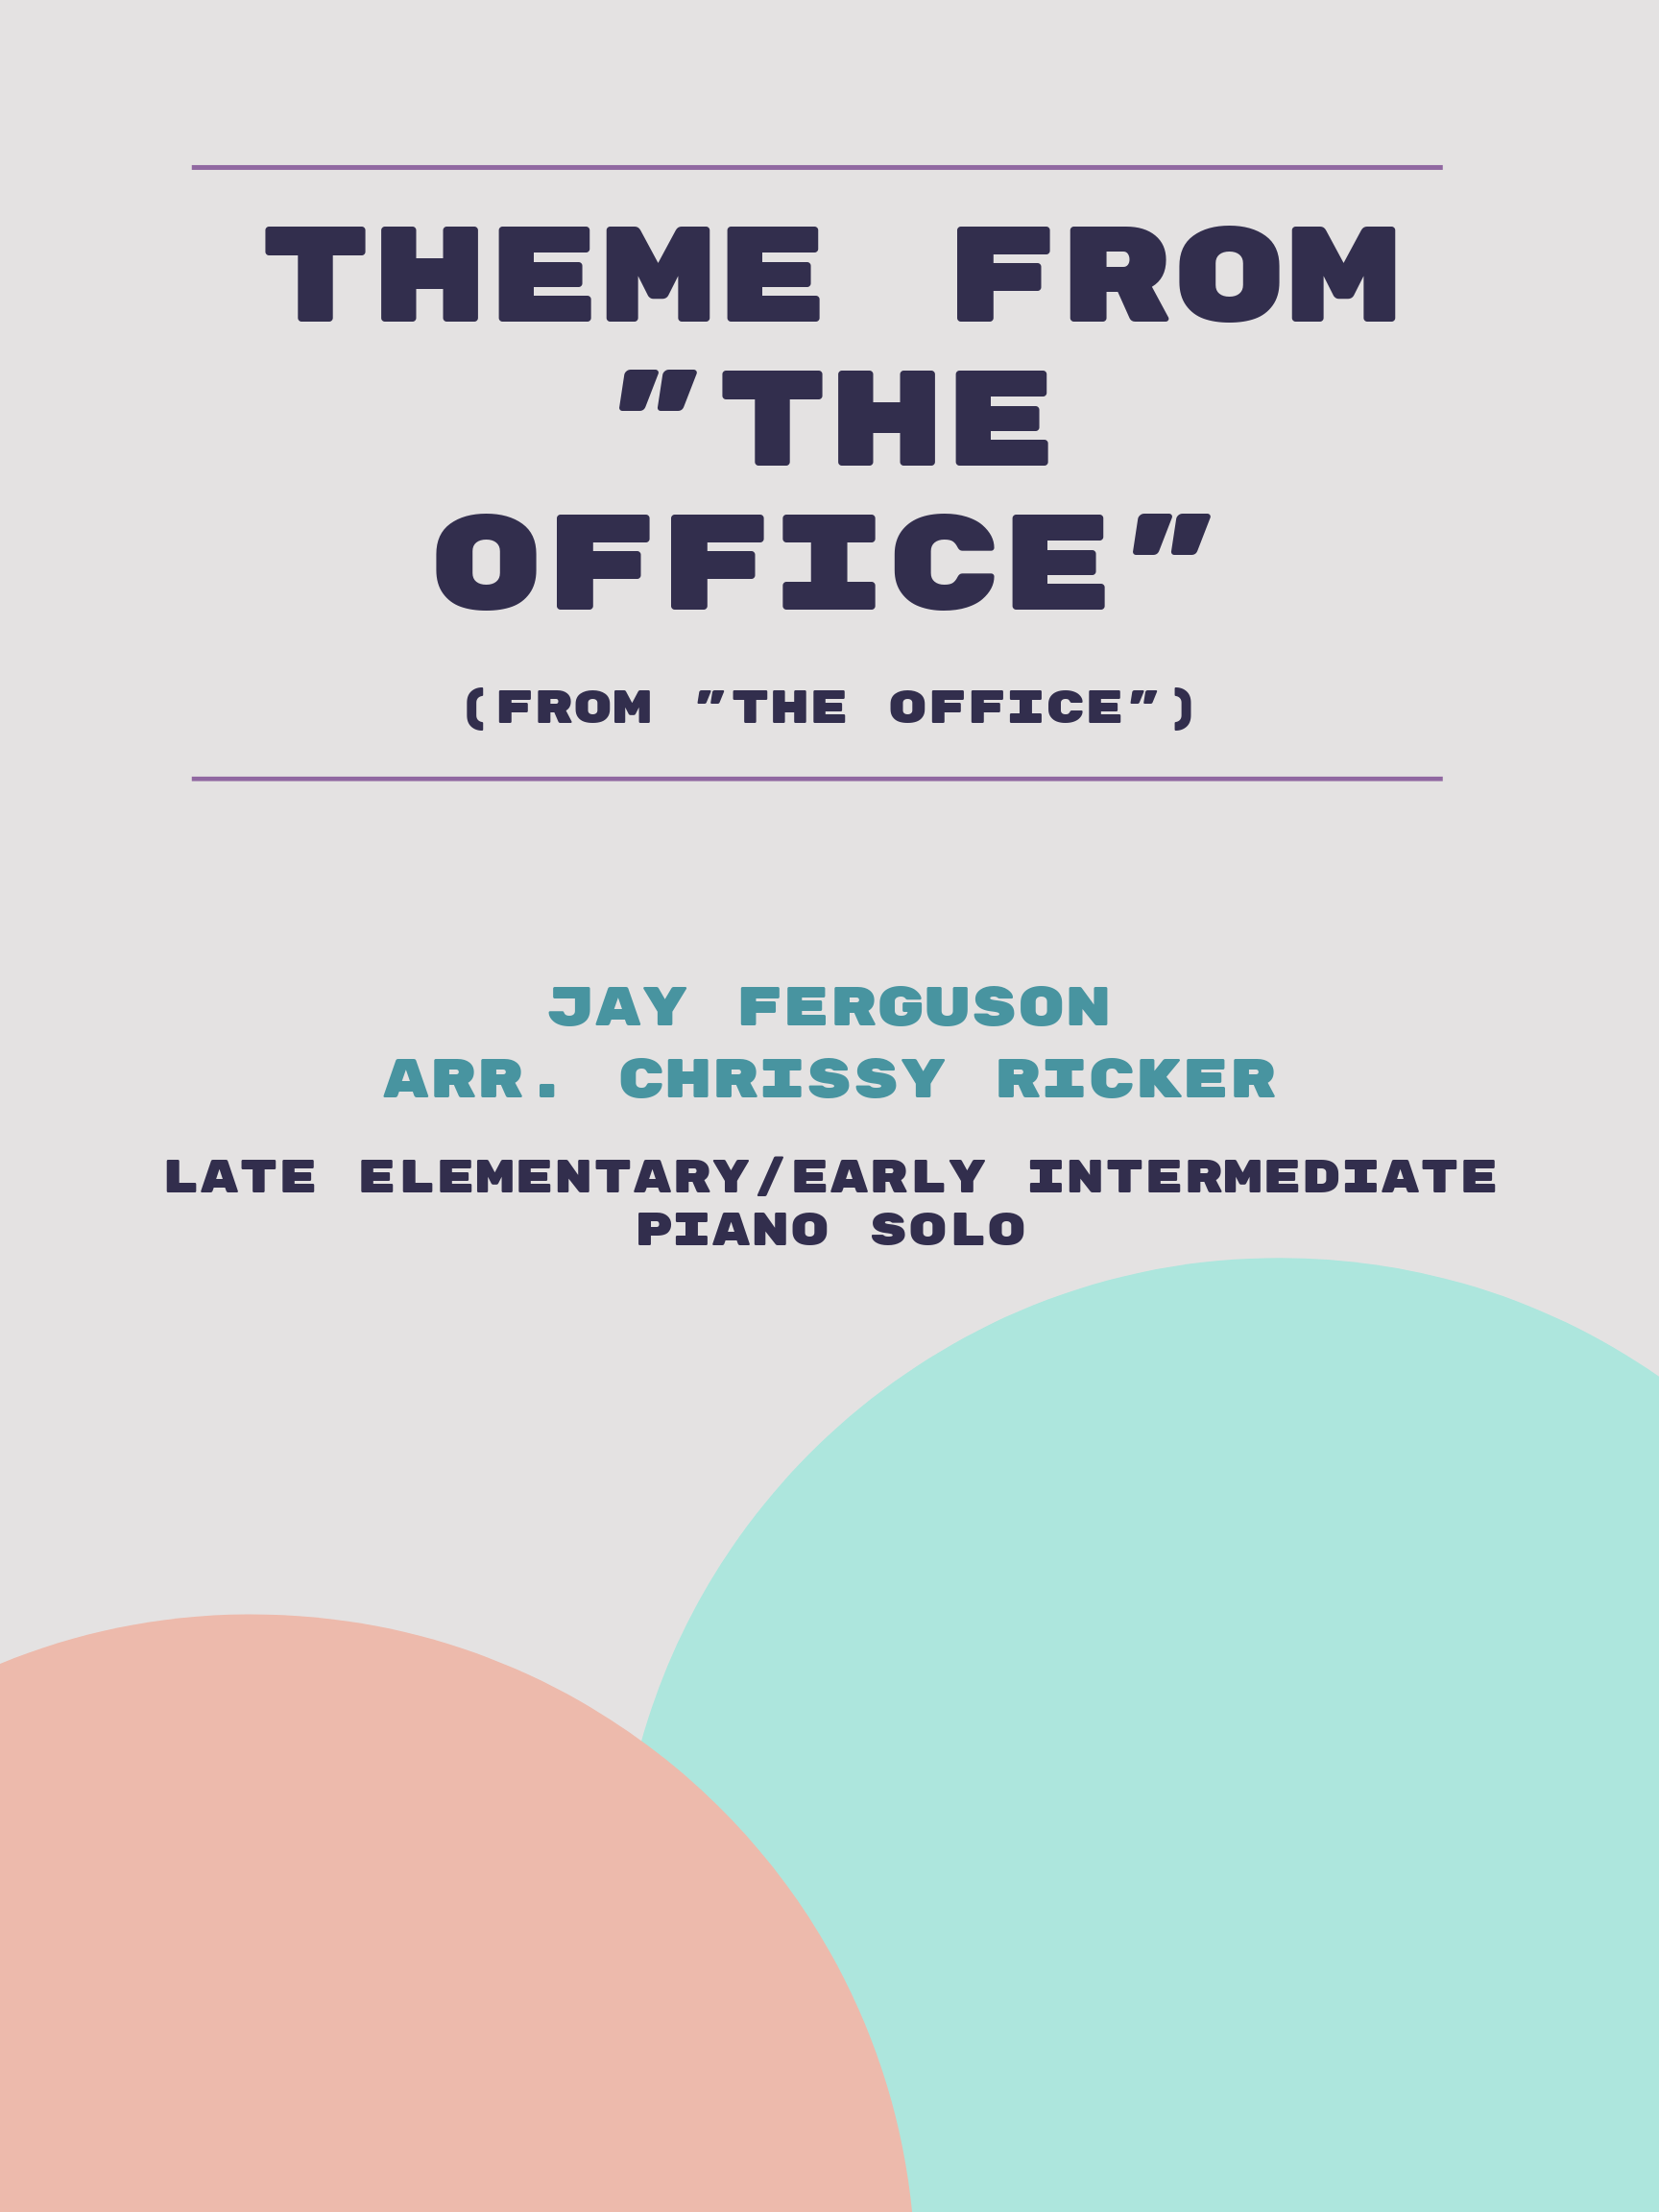 Theme from "The Office" by Jay Ferguson